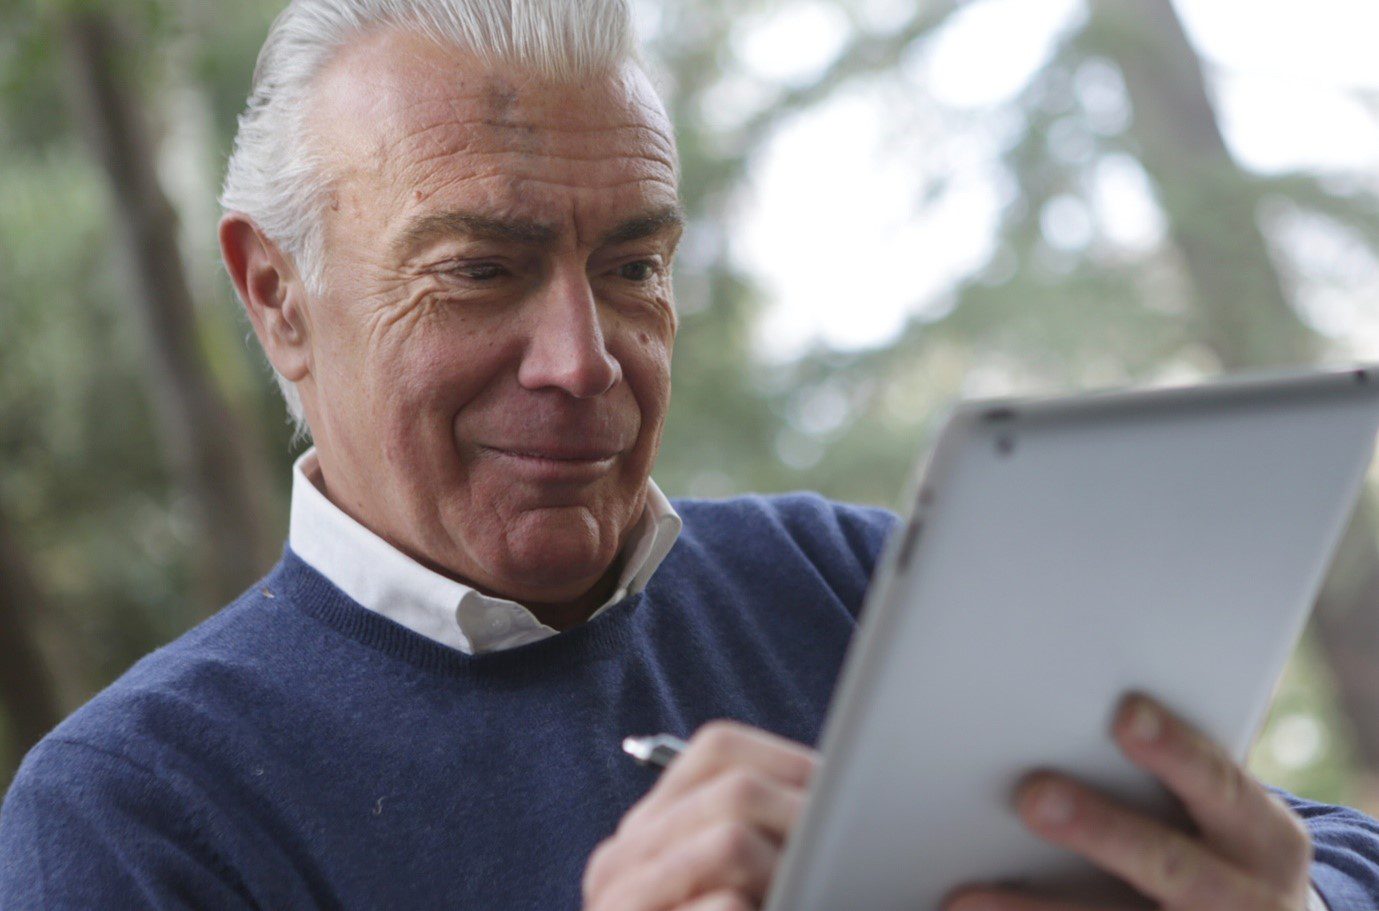 How technology can improve the lives of elderly people